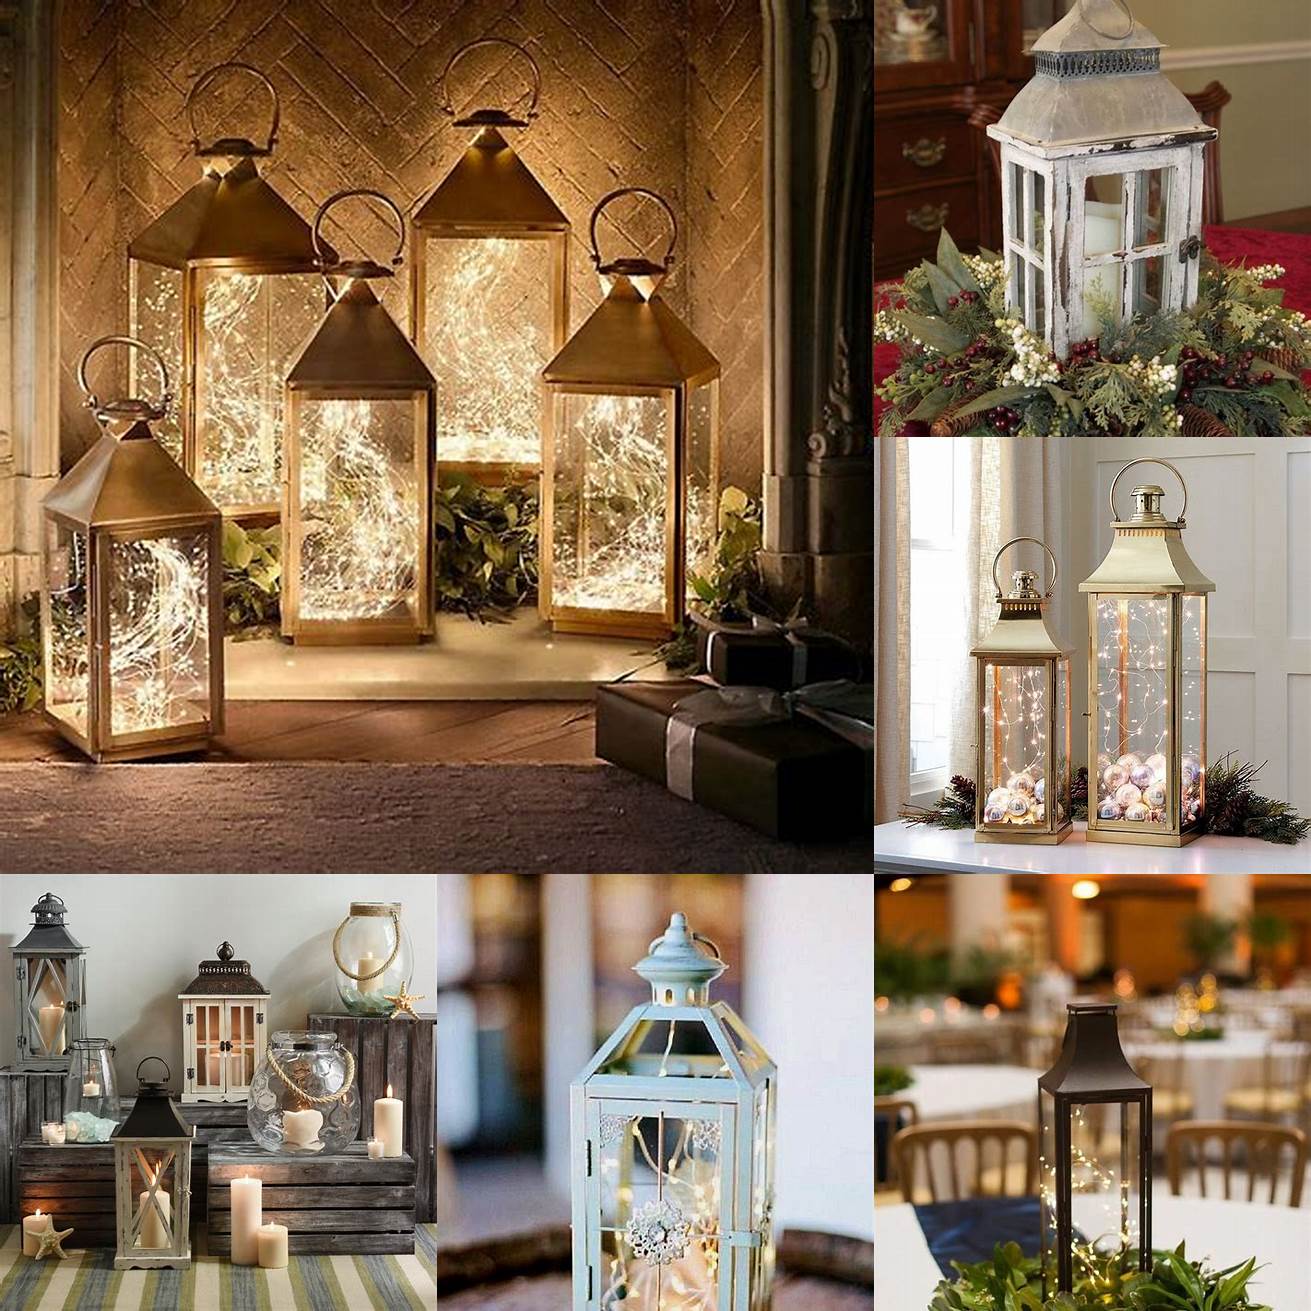 Accessorize Use decorative accents such as lanterns and vases to create a cohesive look